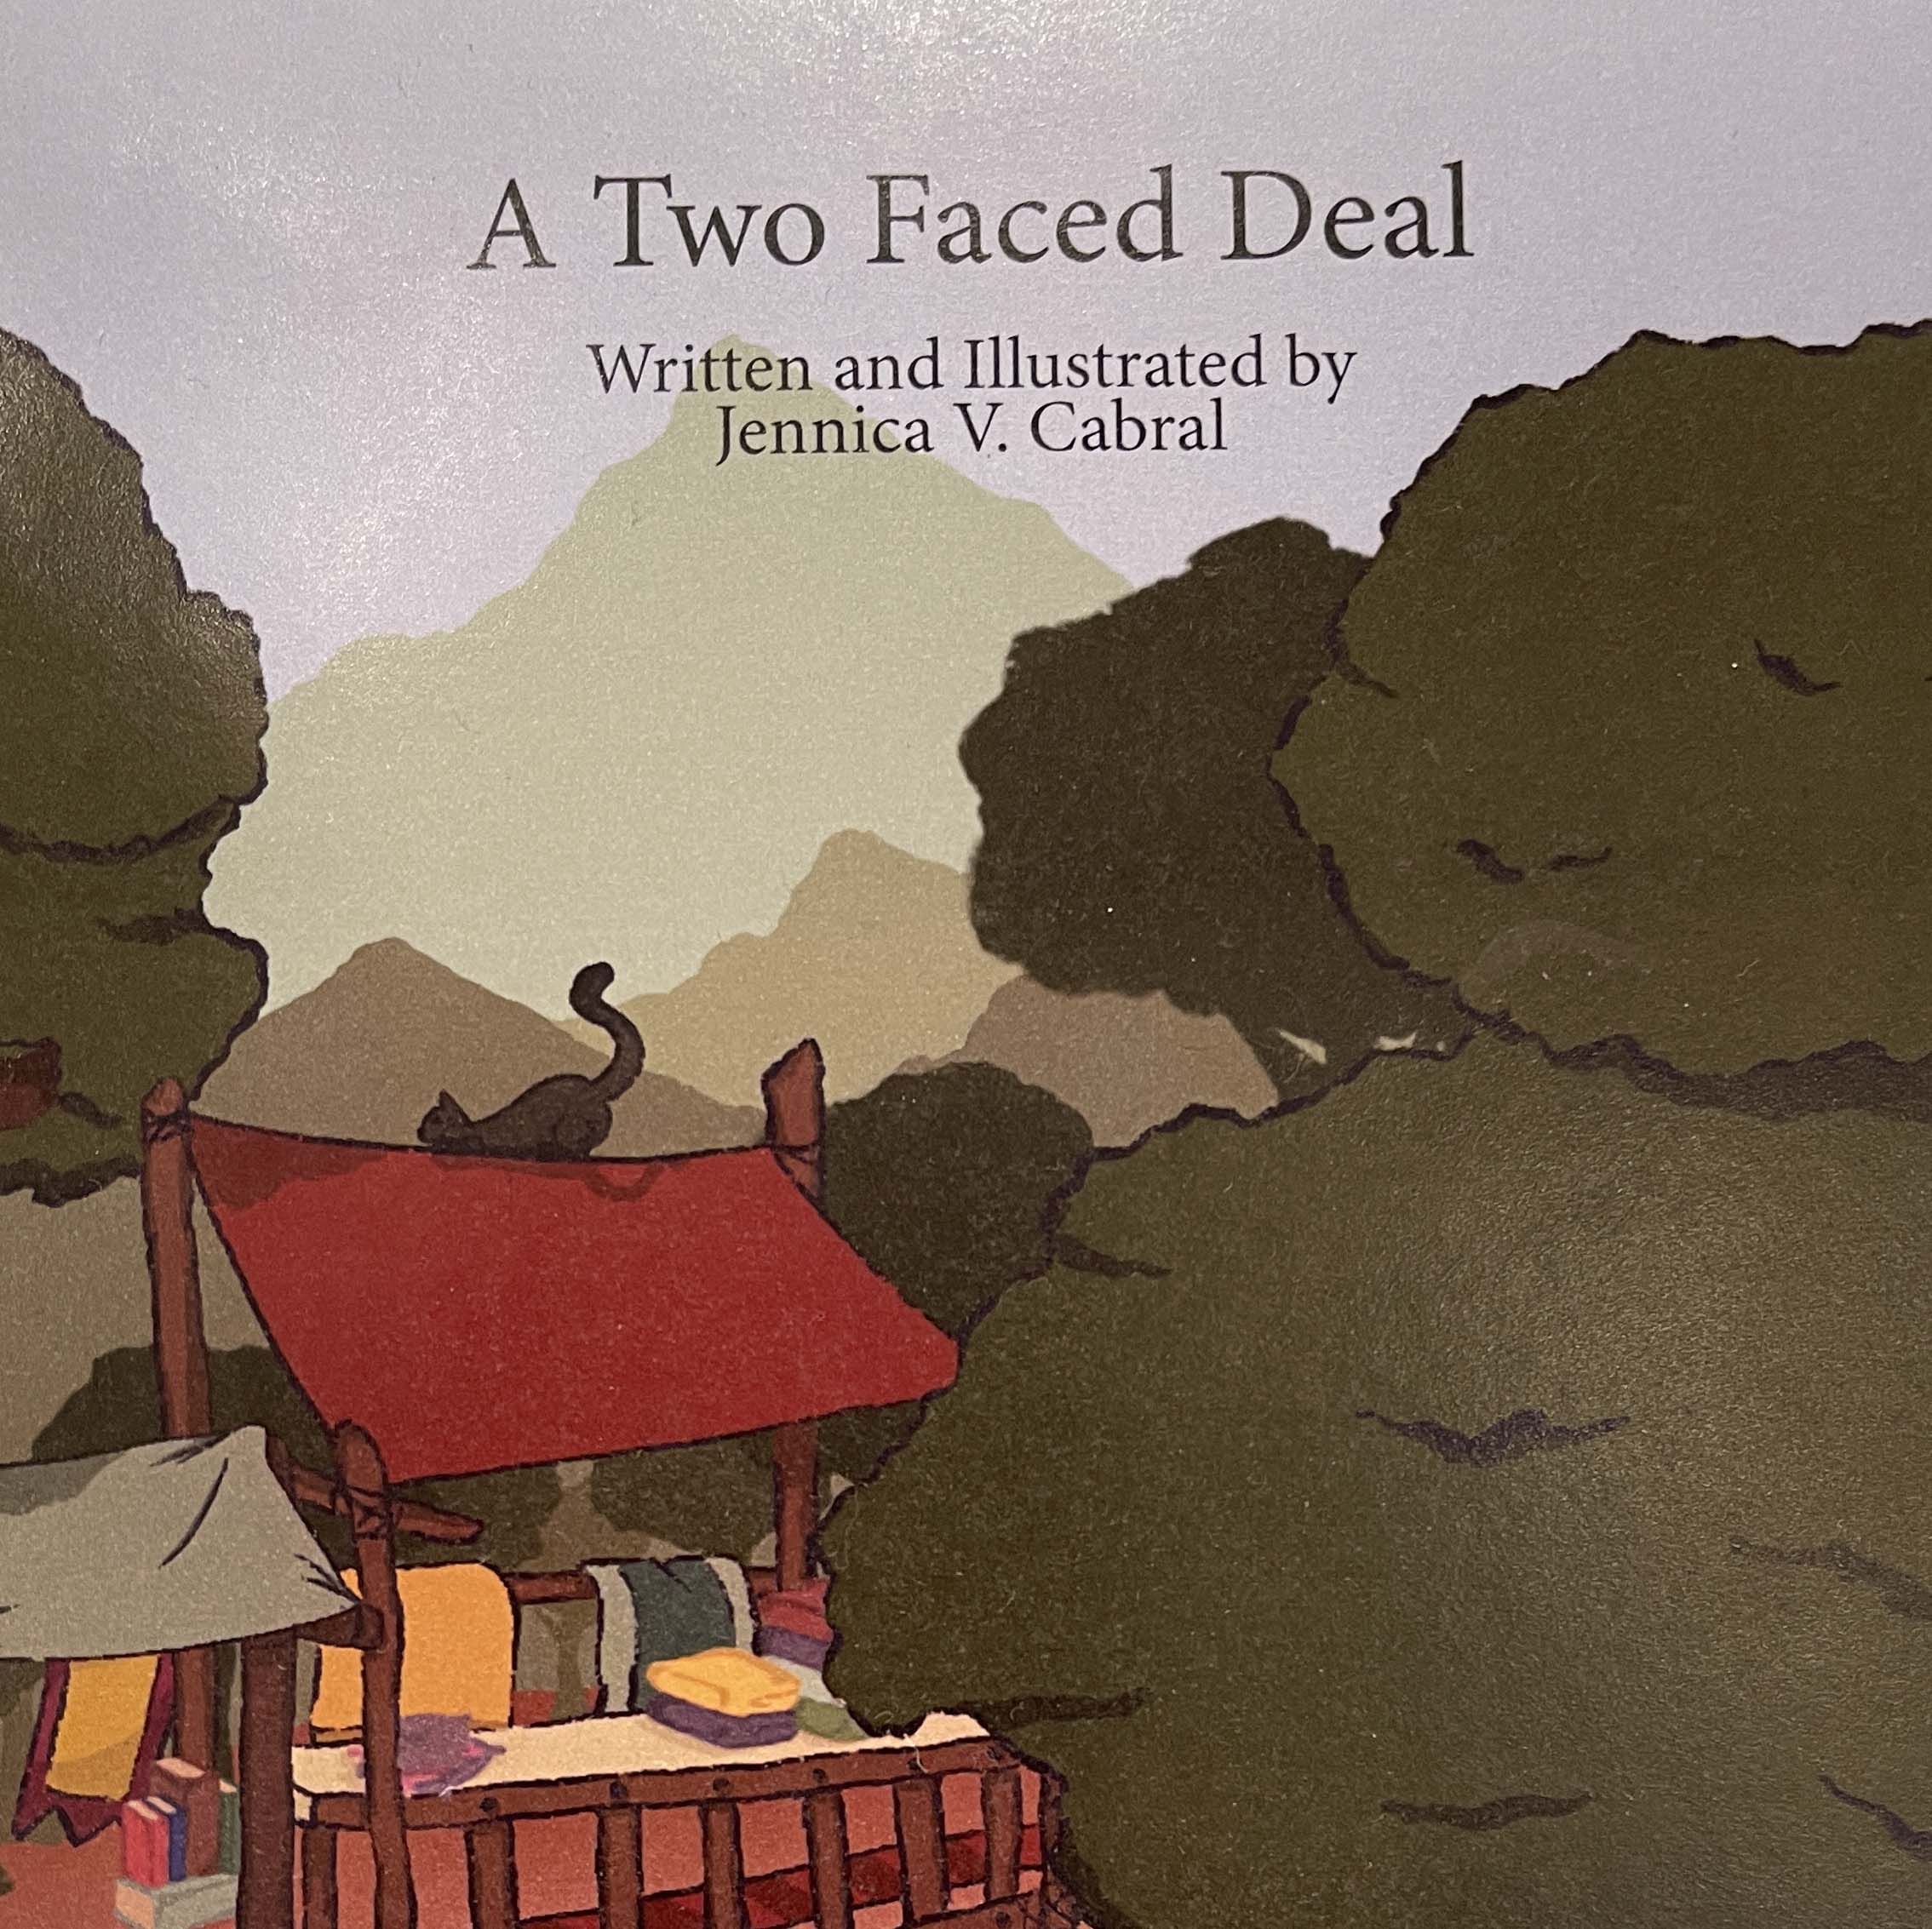 A Two Faced Deal